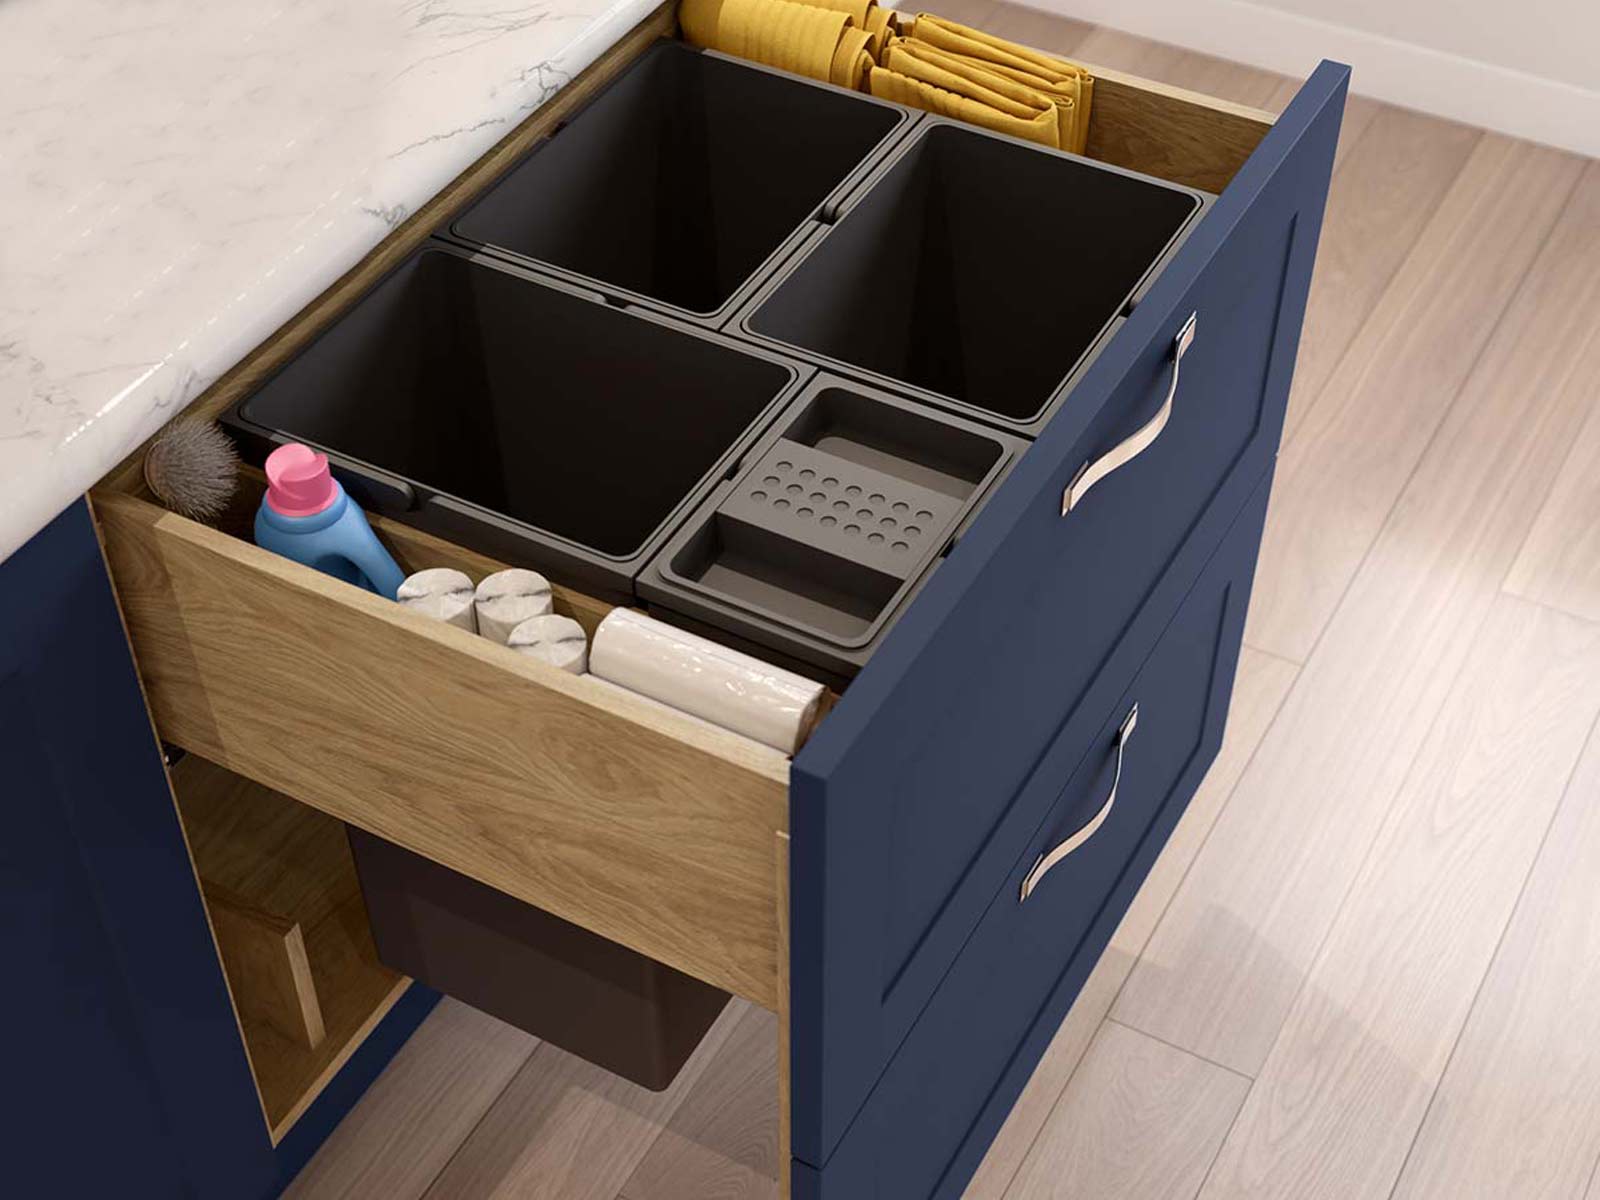 A dark kitchen bin with four compartments and a blue door